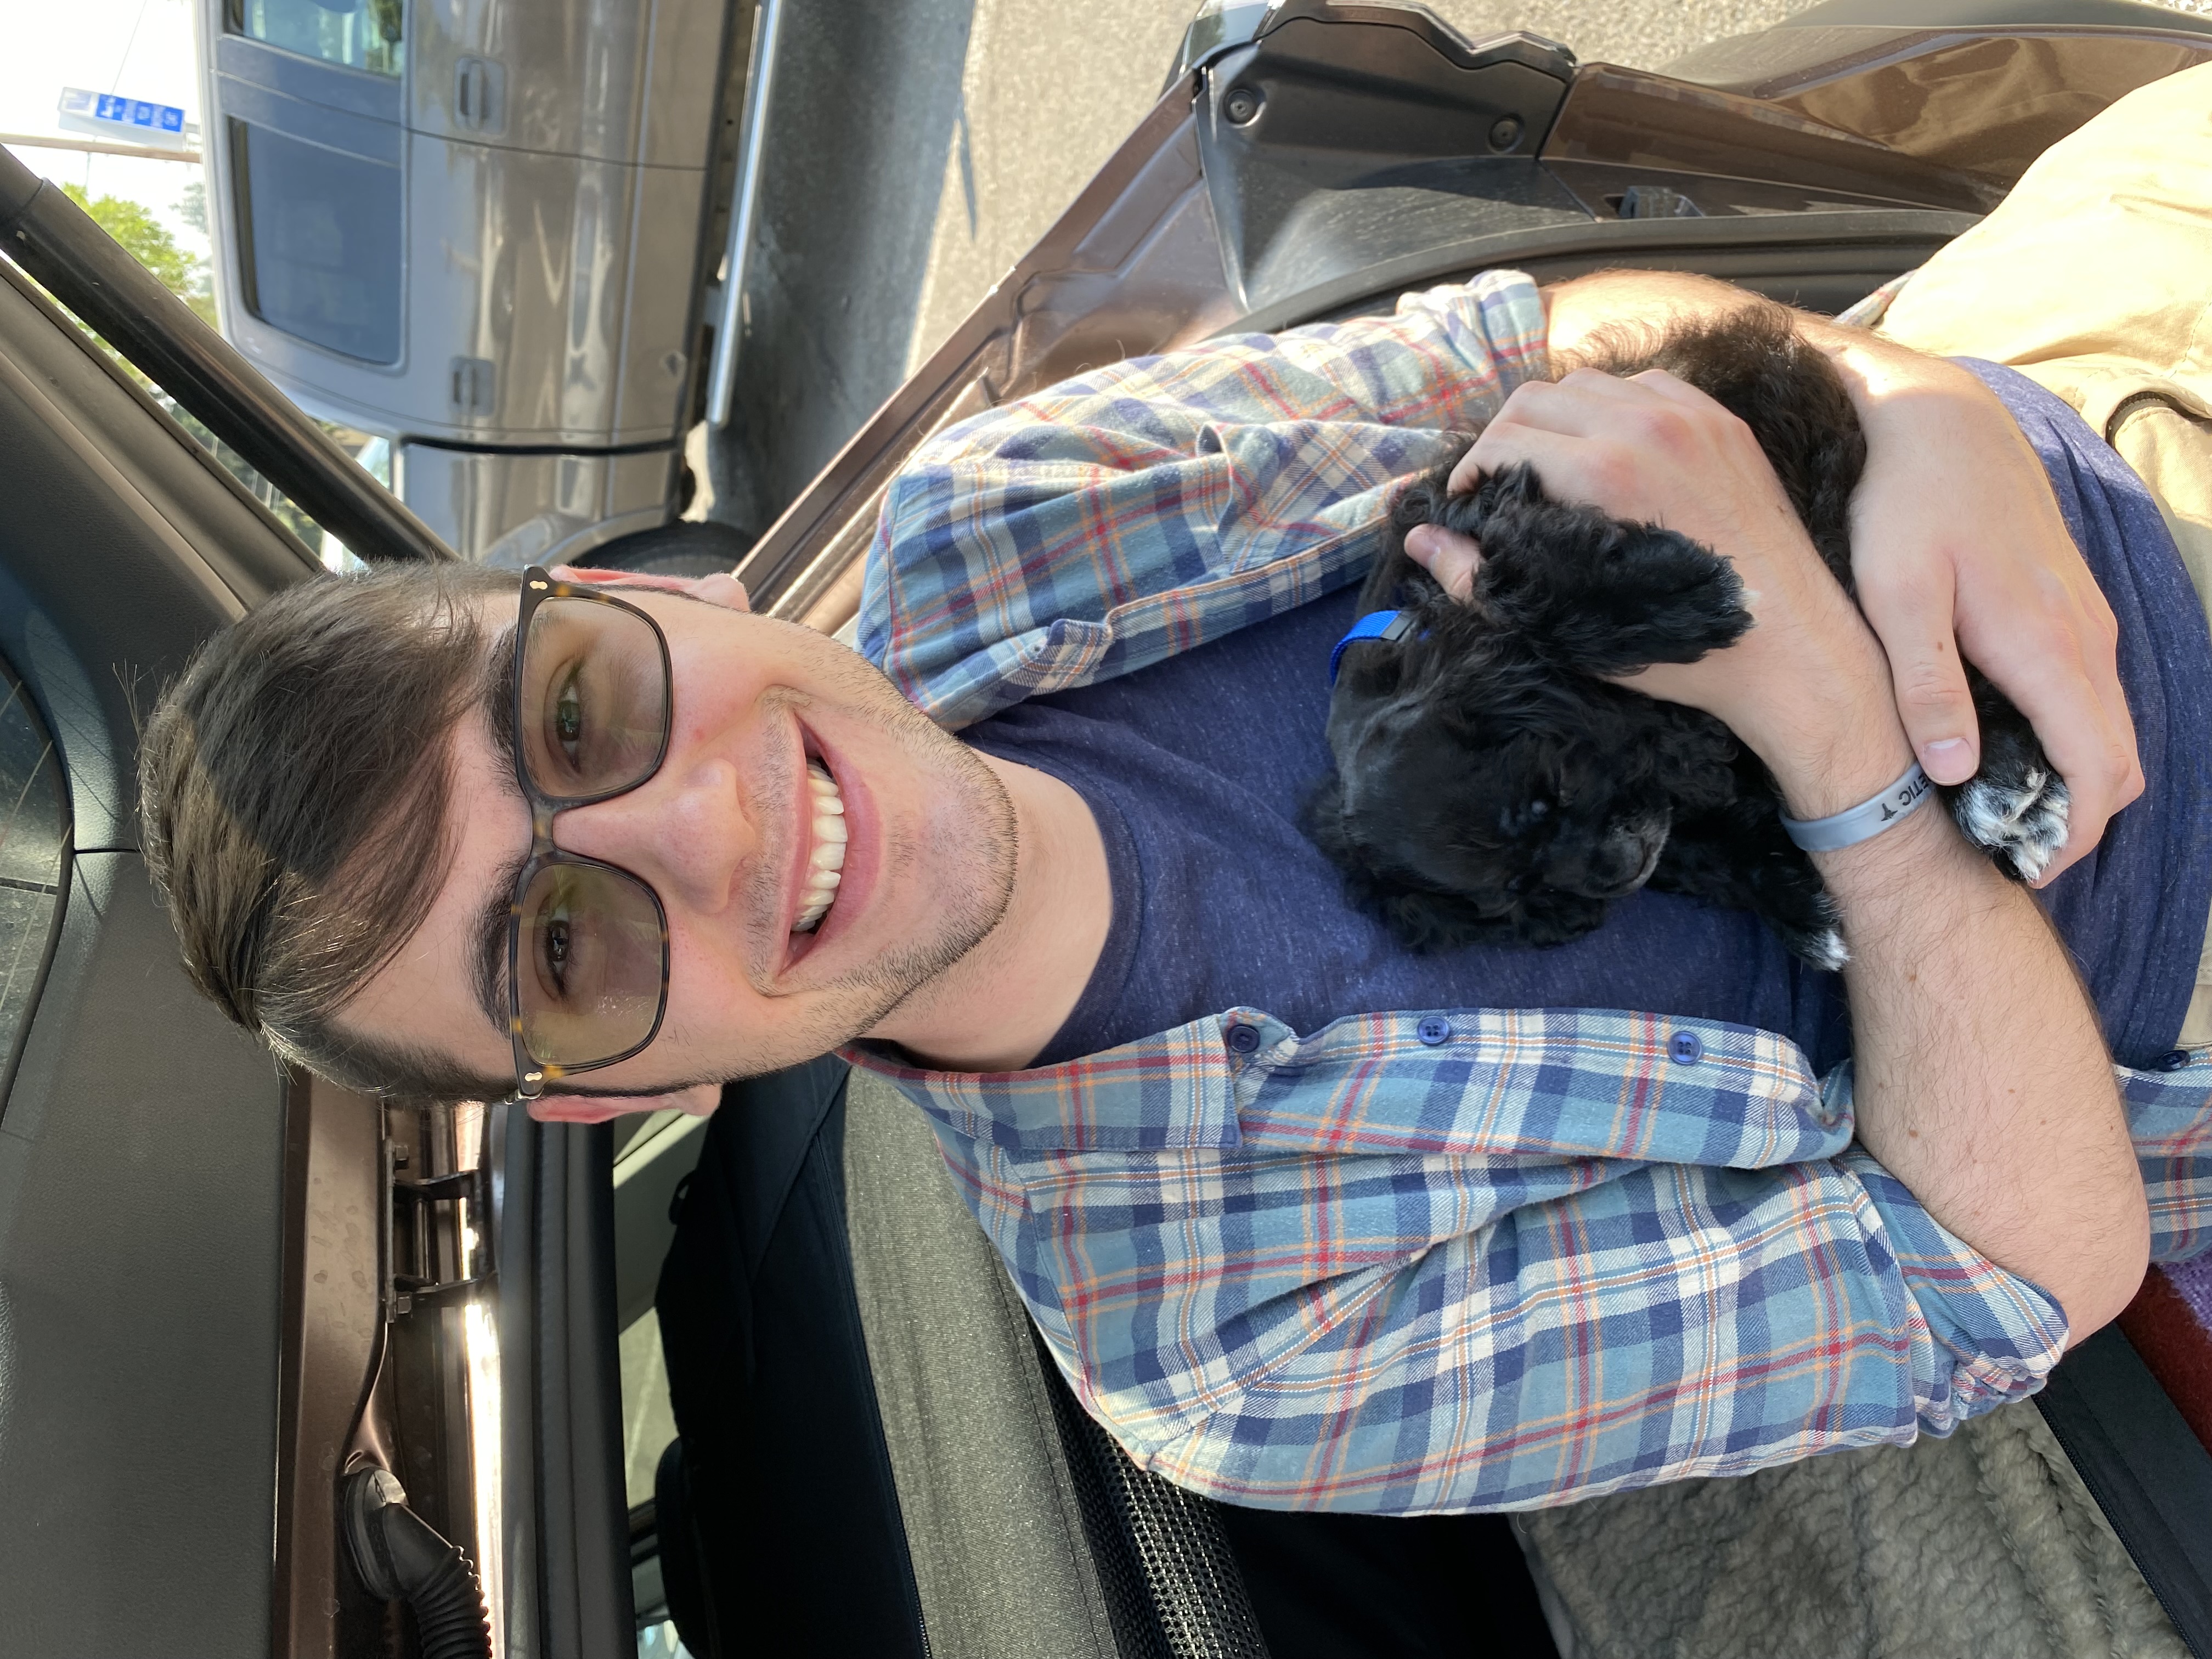 WWU Outstanding Grad Student Hunter Stuehm smiling and holding a small puppy